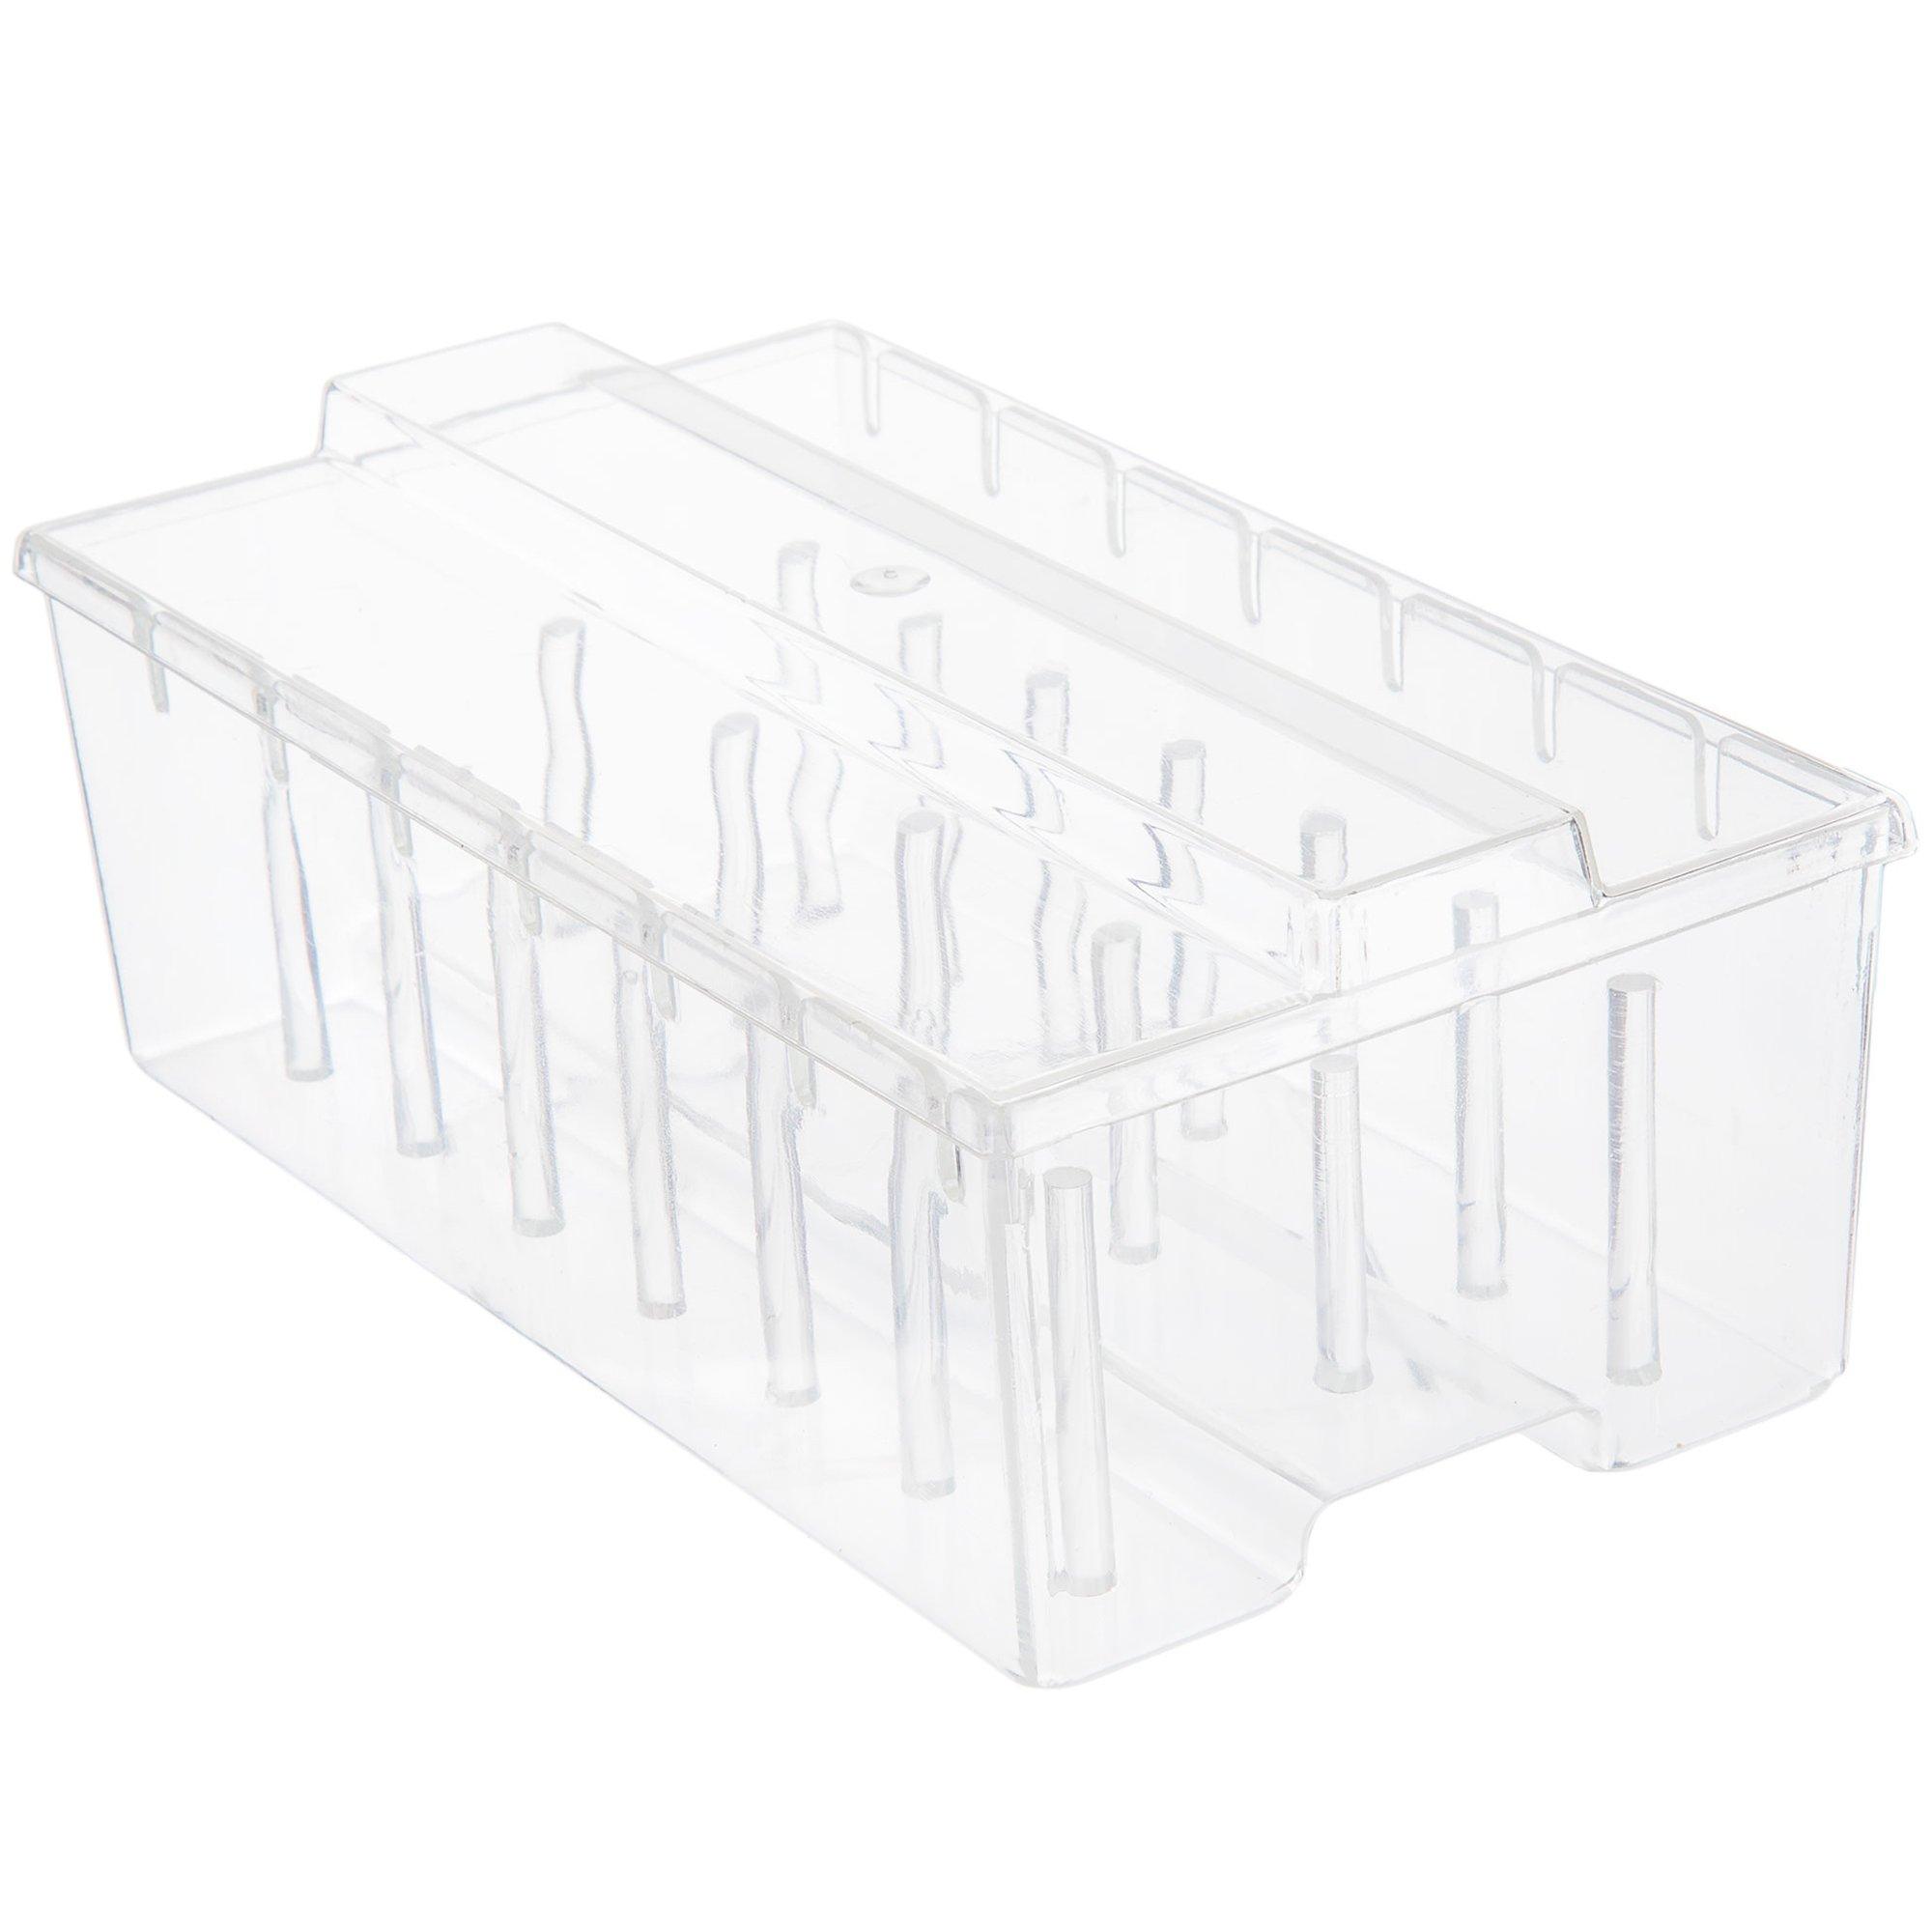 Abbraccia 42 Slots Sewing Thread Holders for Spools of Thread, Empty Thread  Storage Box, Made of Materials, Home Storage is Easier - 9.33x5.4x2.6 inch